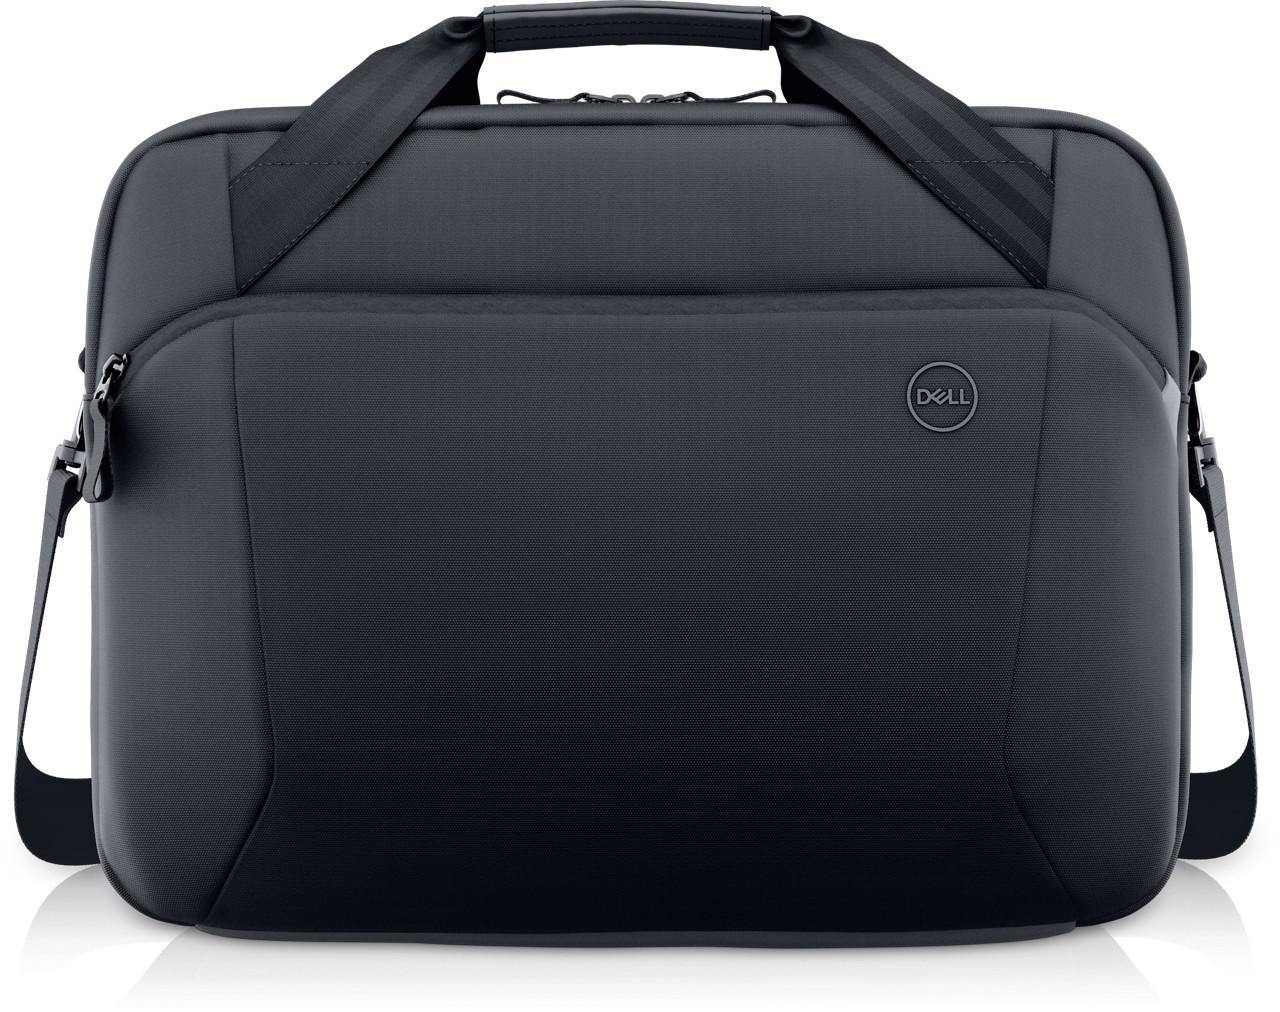 Dell EcoLoop Pro Slim Briefcase 15, Color: Black, Laptop Compatibility: Fits most laptops with screen sizes up to 15.6" (Excluding Dell G Series Gaming, Alienware and Dell Rugged Laptop Series, max laptop dimension: 360 x 255 x 25 mm), Features:  Made with solution-dyeing process for polyester that